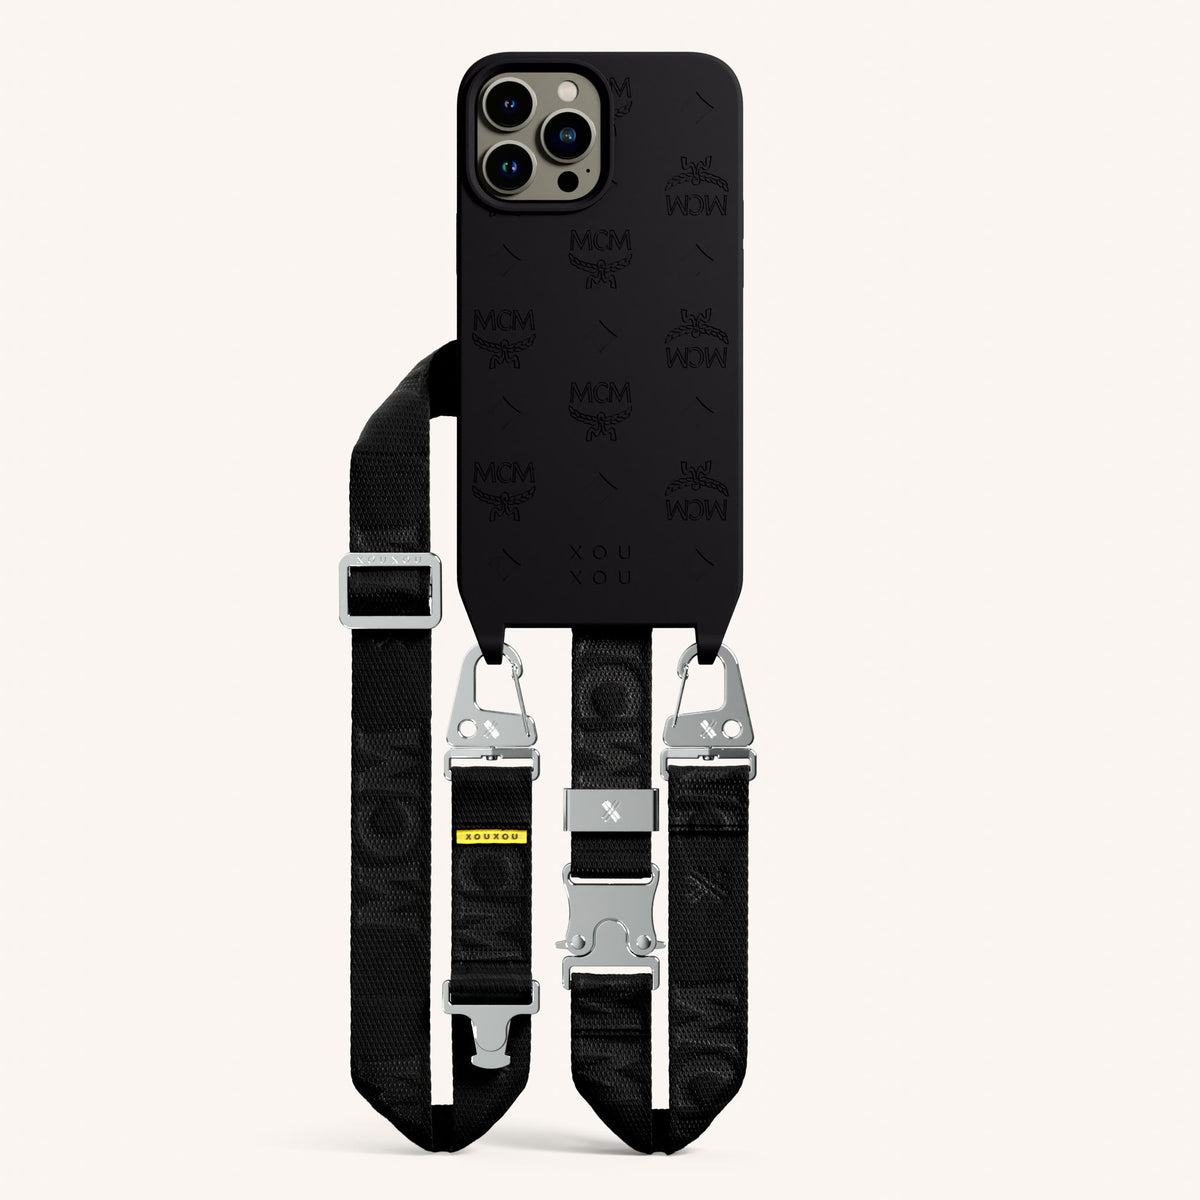 MCM x XOUXOU Phone Necklace for iPhone 13 Pro Max with MagSafe in Black Total View | XOUXOU #phone model_iphone 13 pro max